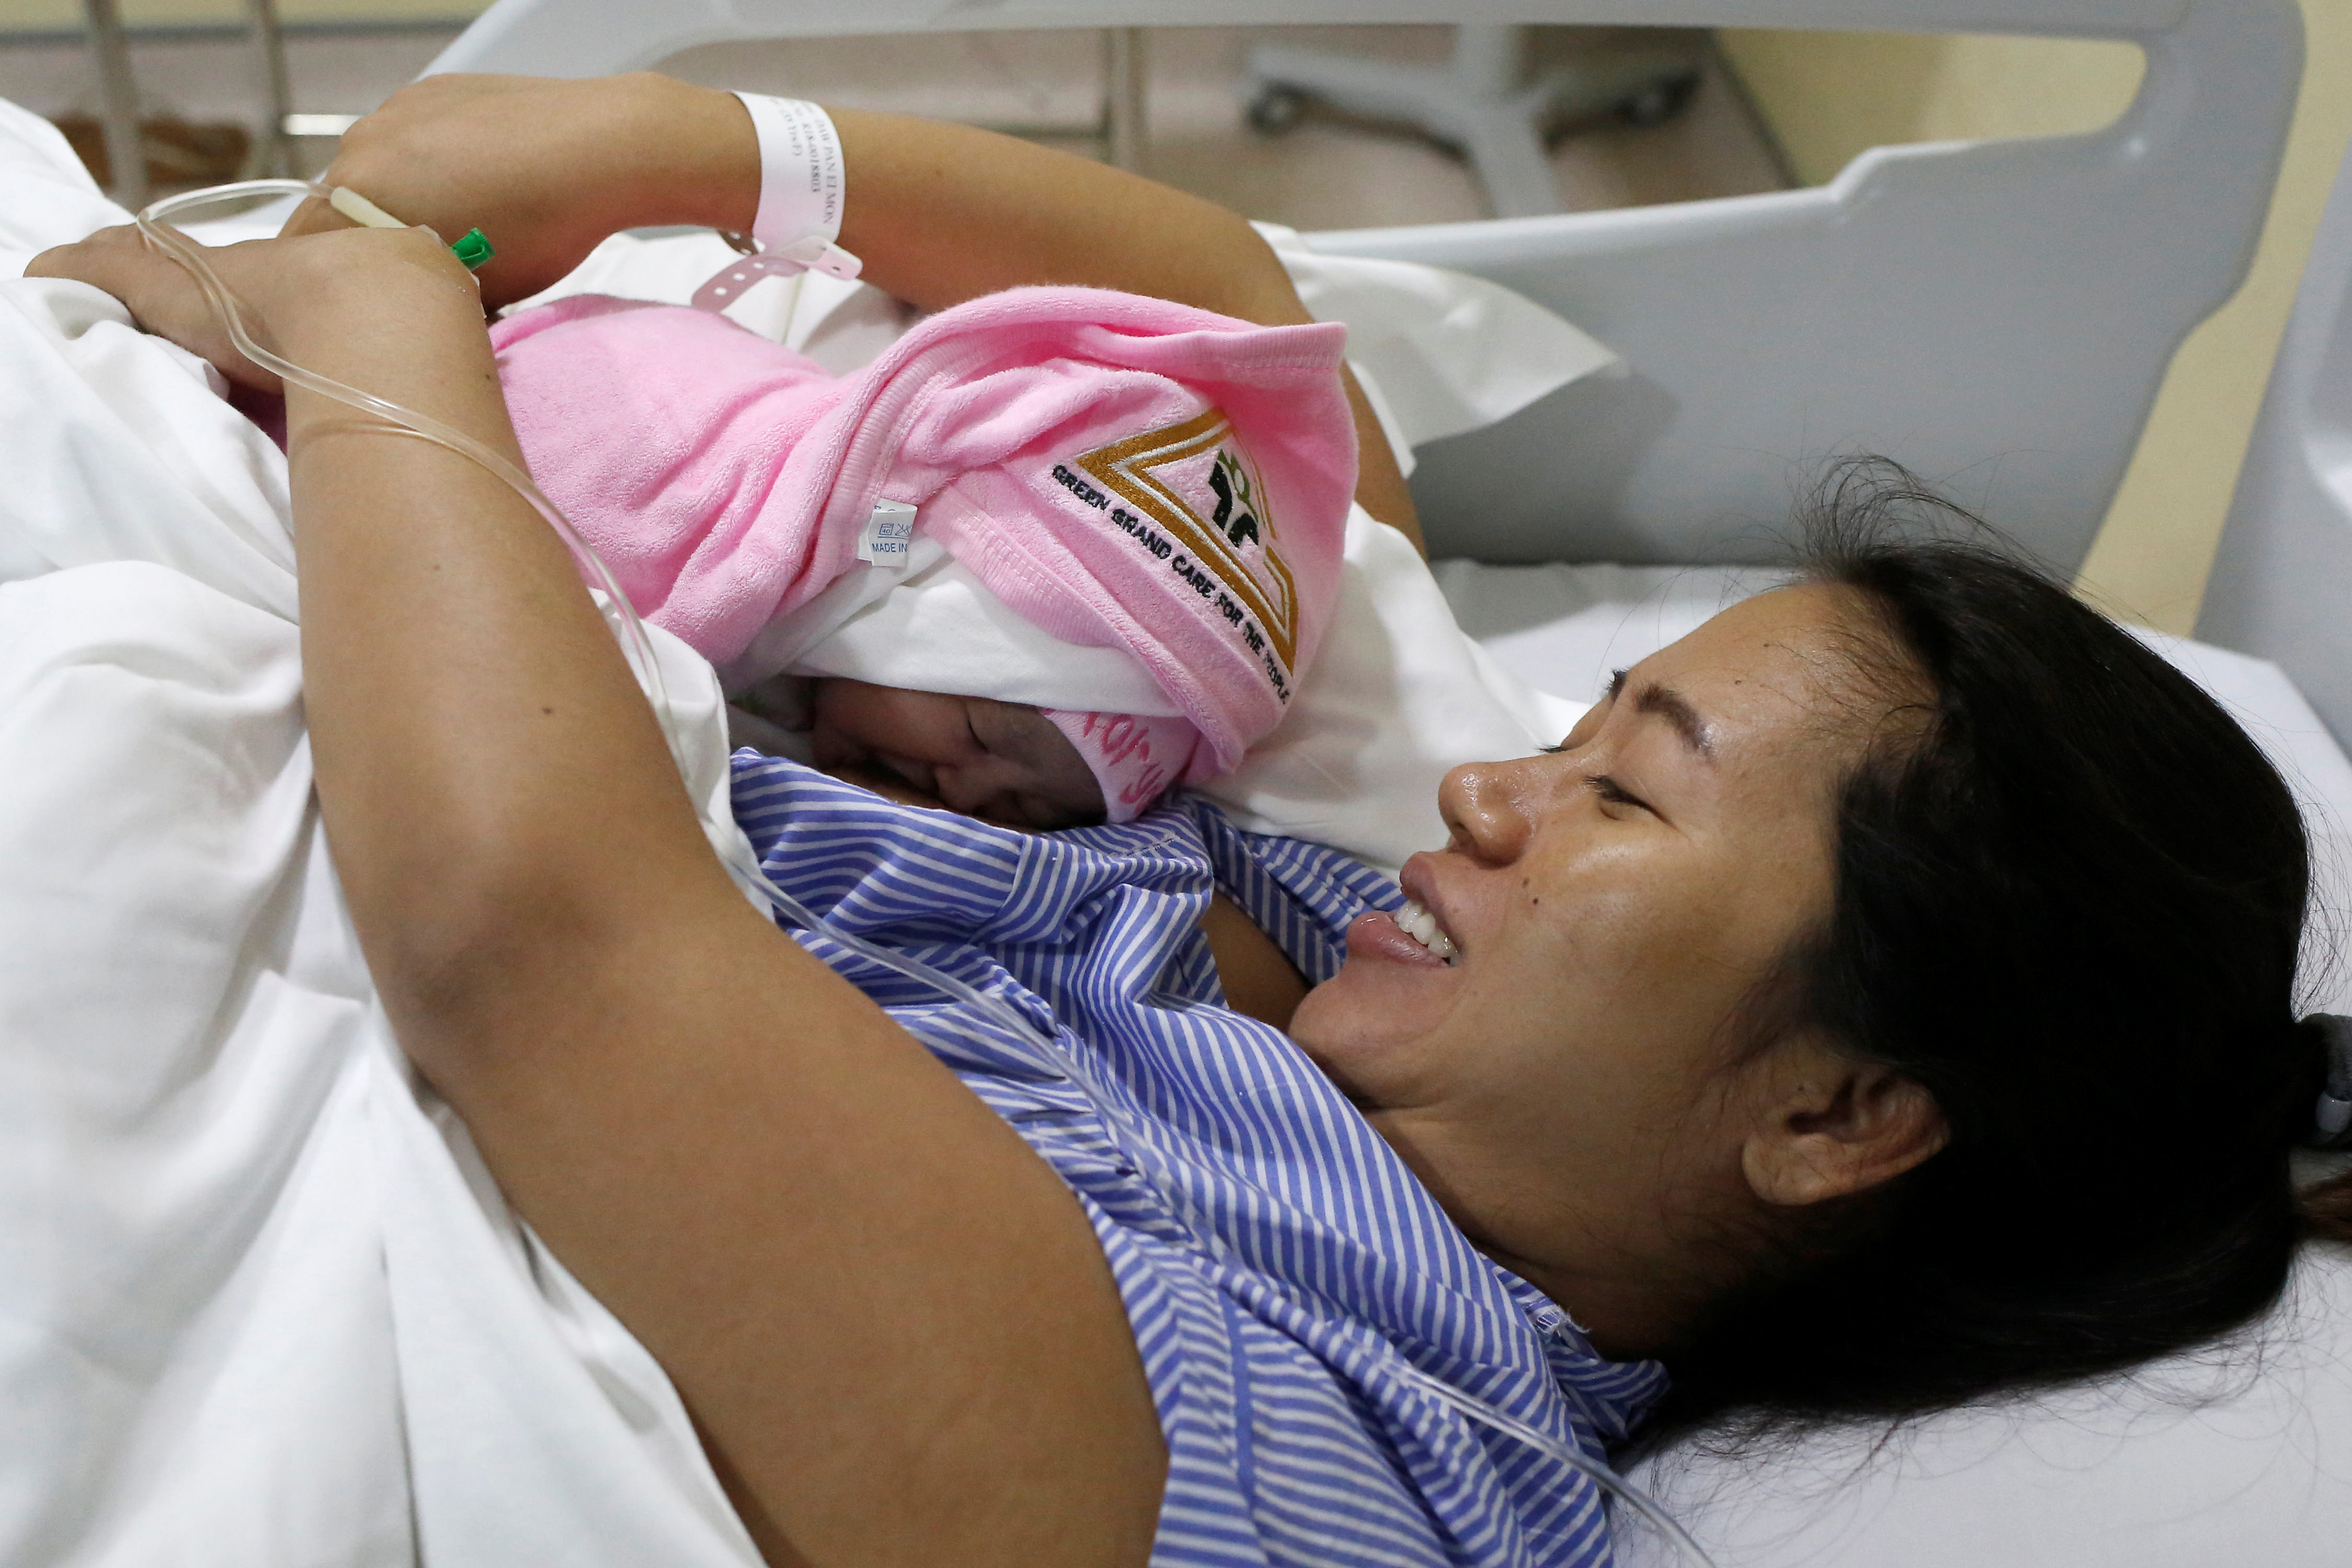 Pan Ei Mon, the wife of detained Reuters journalist Wa Lone, embraces her new born baby girl Thet Htar Angel in her hospital room in Yangon, Myanmar Aug. 10, 2018. Photo: REUTERS / Ann Wang